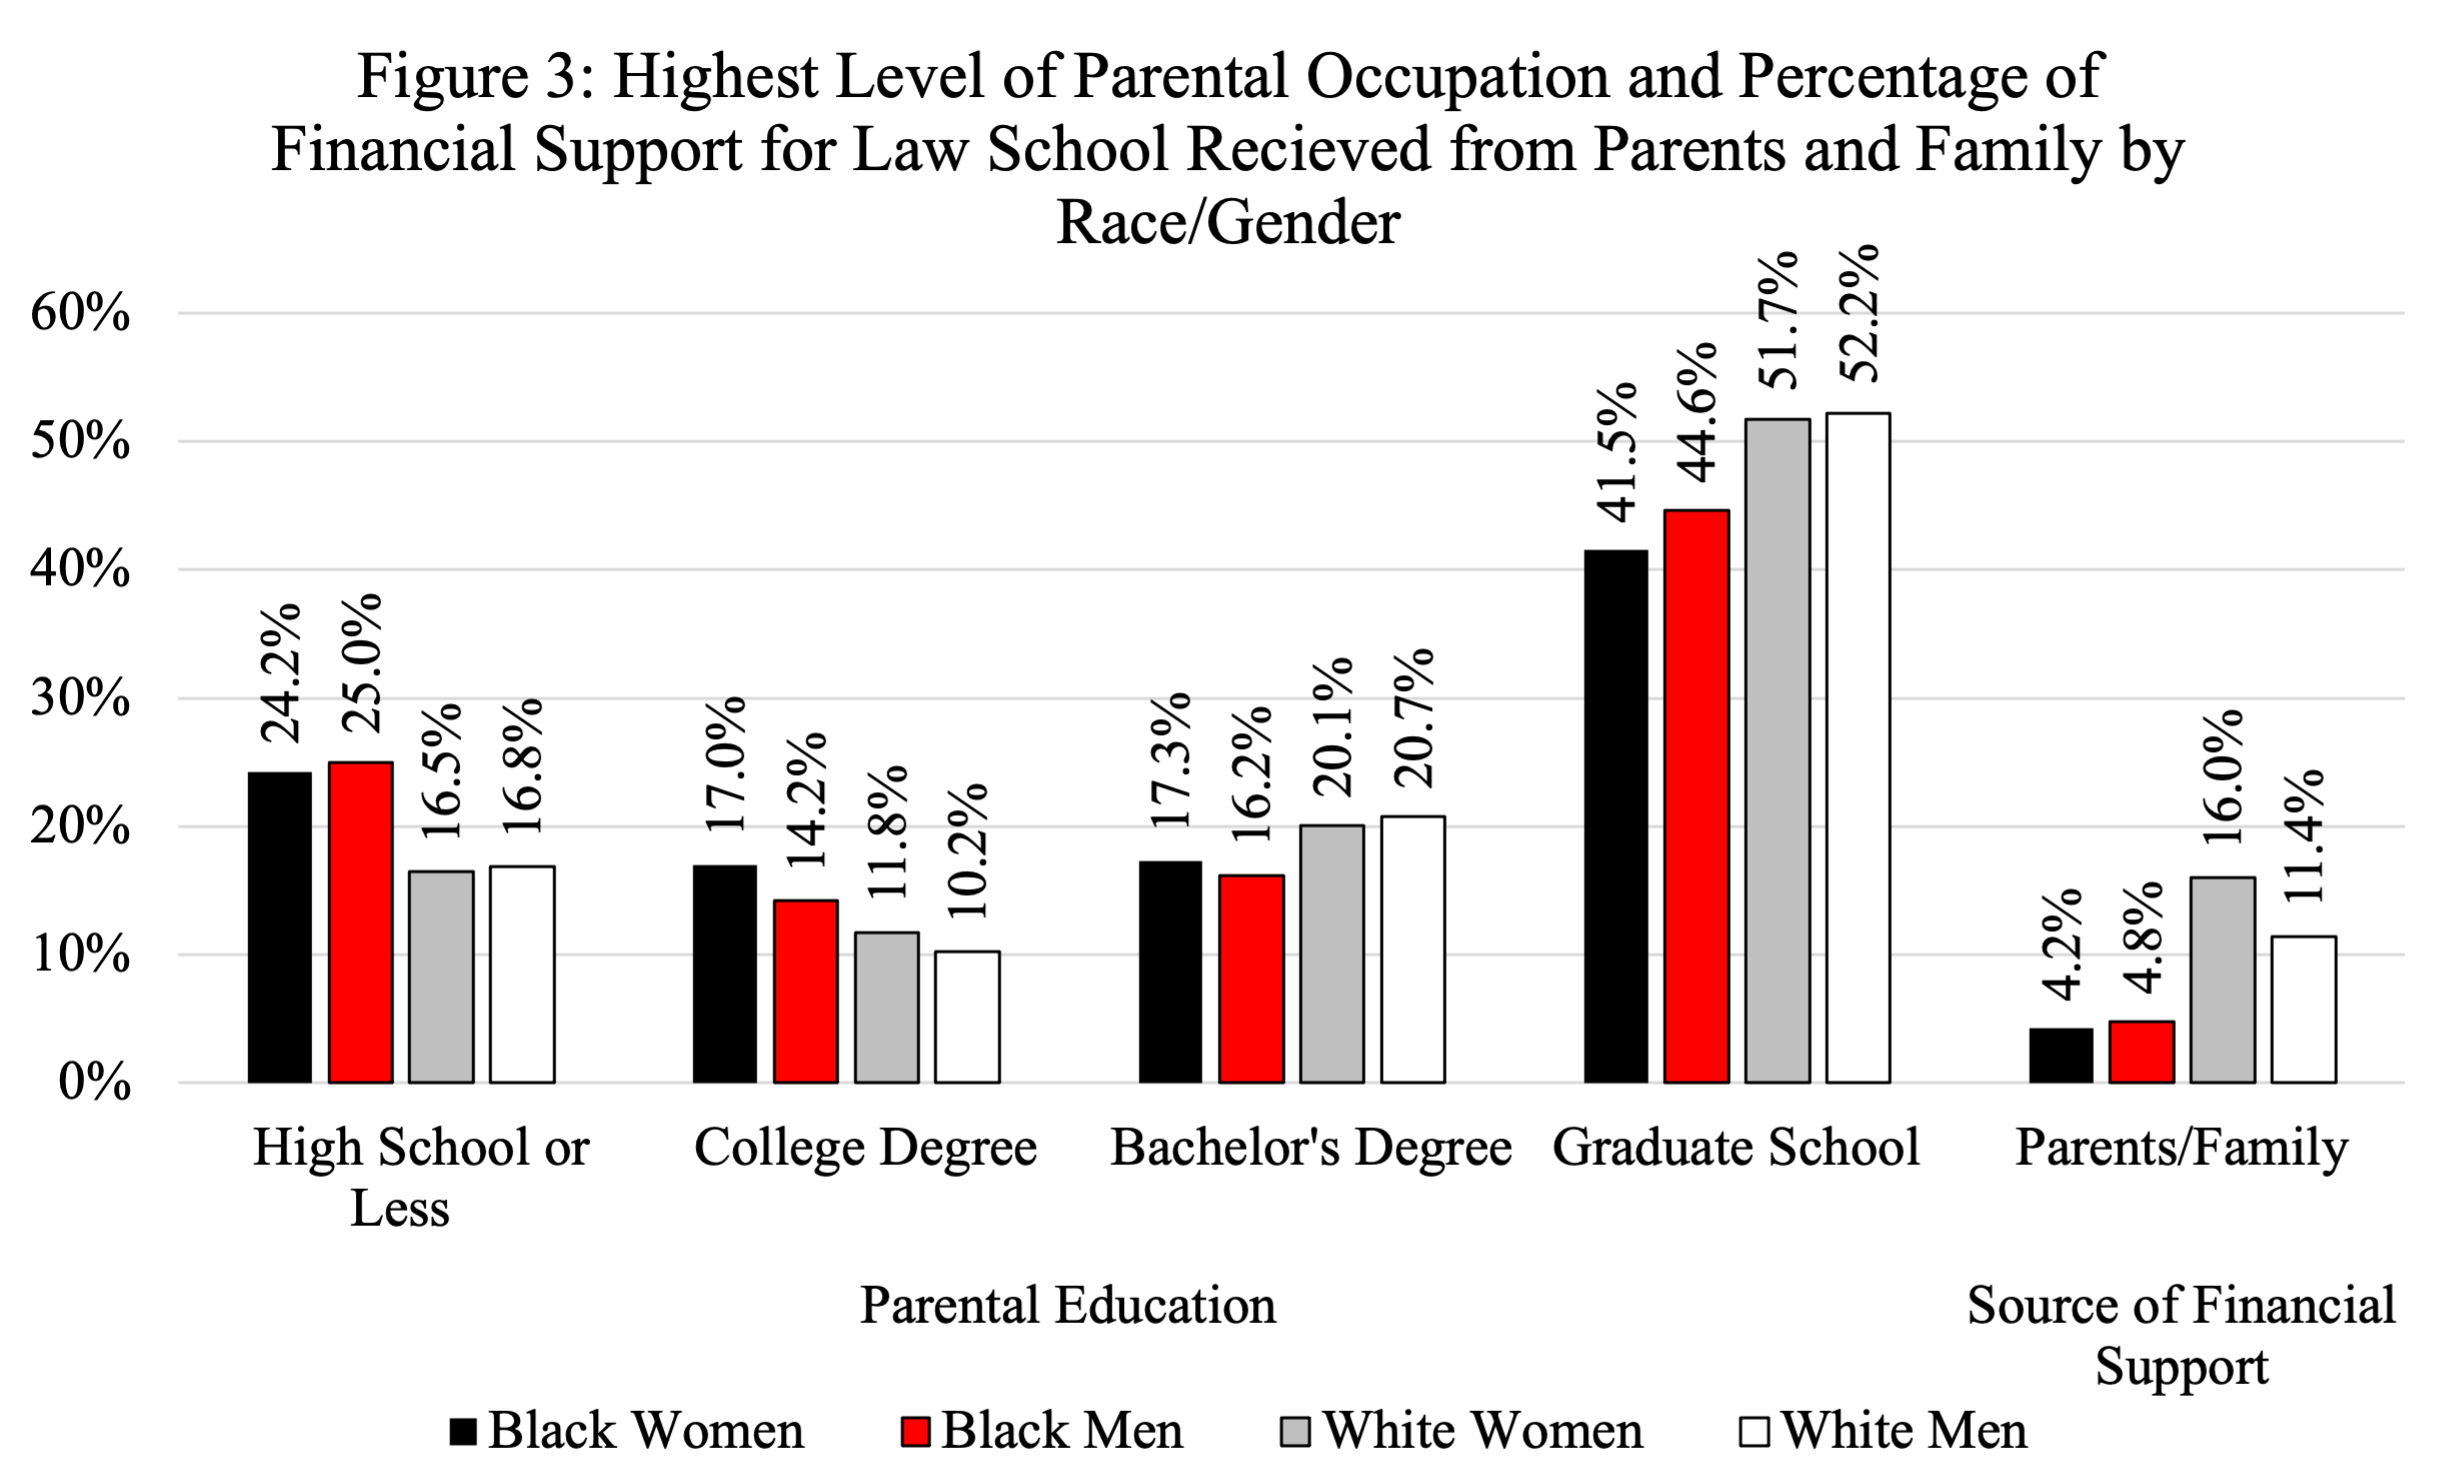 Figure 3: Bar chart showing Highest Level of Parental Occupation and Percentage of Financial Support for Law School Received from Parents and Family by Race/Gender, broken down by Black women, Black men, White women, and White men

High school or less parental education for Black women: 24.2%
College degree parental education for Black women: 17%
Bachelor's degree parental education for Black women: 17.3%
Graduate school parental education for Black women: 41.5%


High school or less parental education for Black men: 25%
College degree parental education for Black men: 14.2%
Bachelor's degree parental education for Black men: 16.2%
Graduate school parental education for Black men:44.^%

High school or less parental education for White women:  16.5%
College degree parental education for White women: 11.8%
Bachelor's degree parental education for White women: 20.1%
Graduate school parental education for White women: 51.7%

High school or less parental education for White men:  16.8%
College degree parental education for White men: 10.2%
Bachelor's degree parental education for White men: 20.7%
Graduate school parental education for White men: 52.2%

Black women for whom parents/family were source of financial support: 4.2%
Black men for whom parents/family were source of financial support: 4.8%
White women for whom parents/family were source of financial support: 16%
White men for whom parents/family were source of financial support: 11.4%
